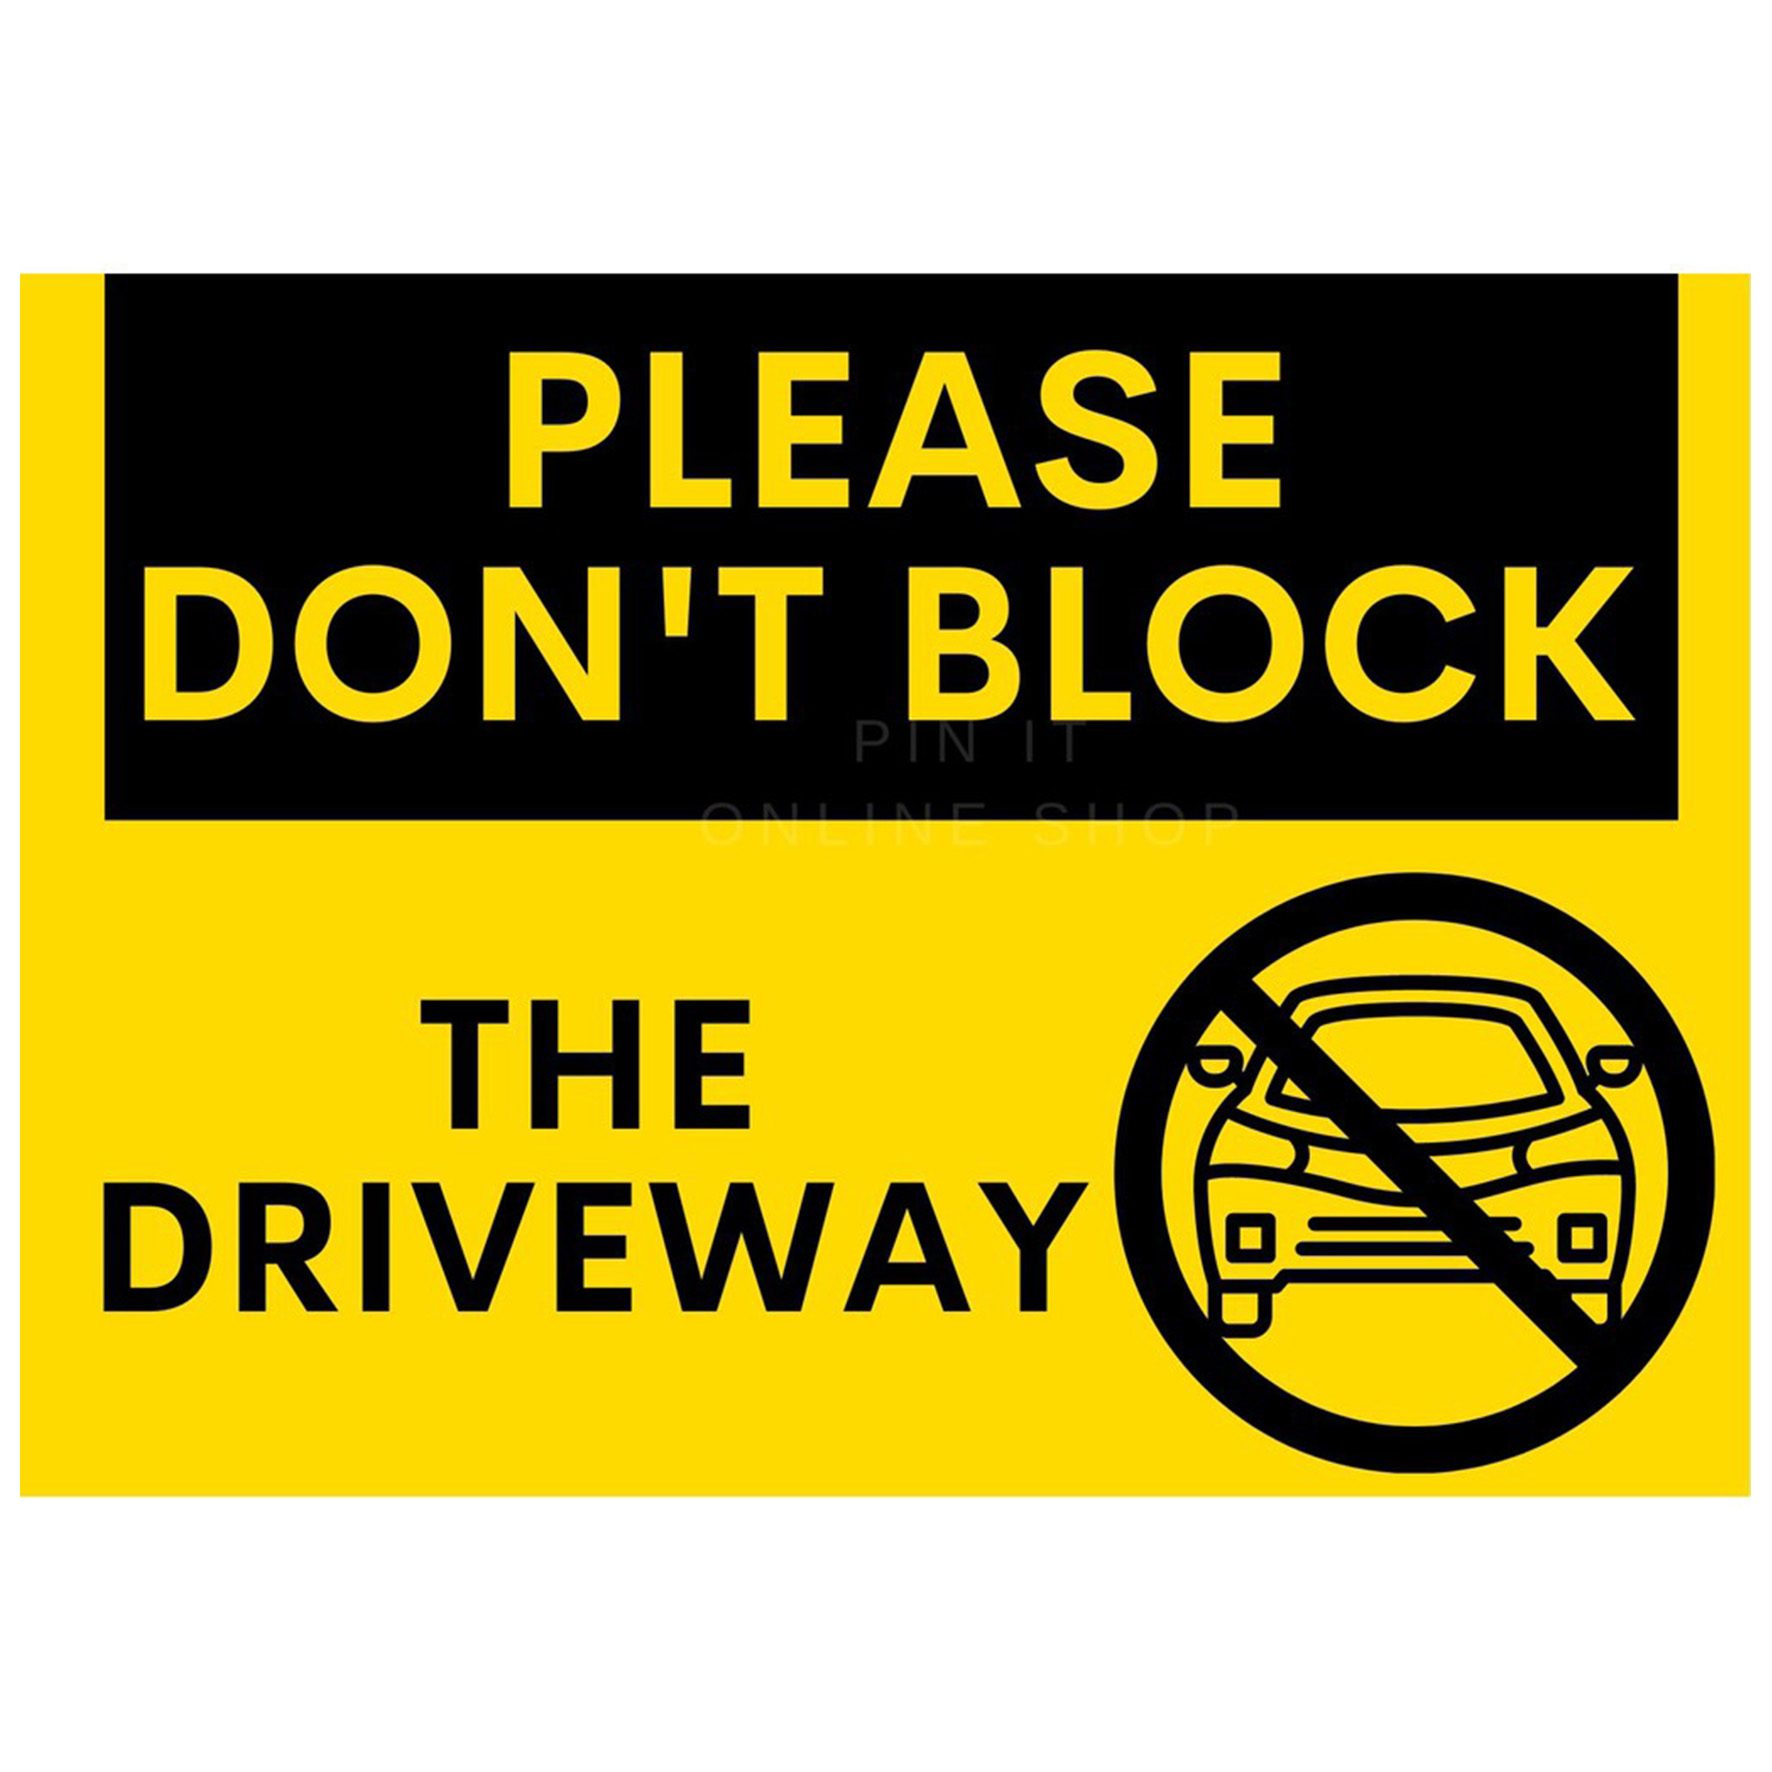 please-don-t-block-the-driveway-yellow-laminated-signage-waterproof